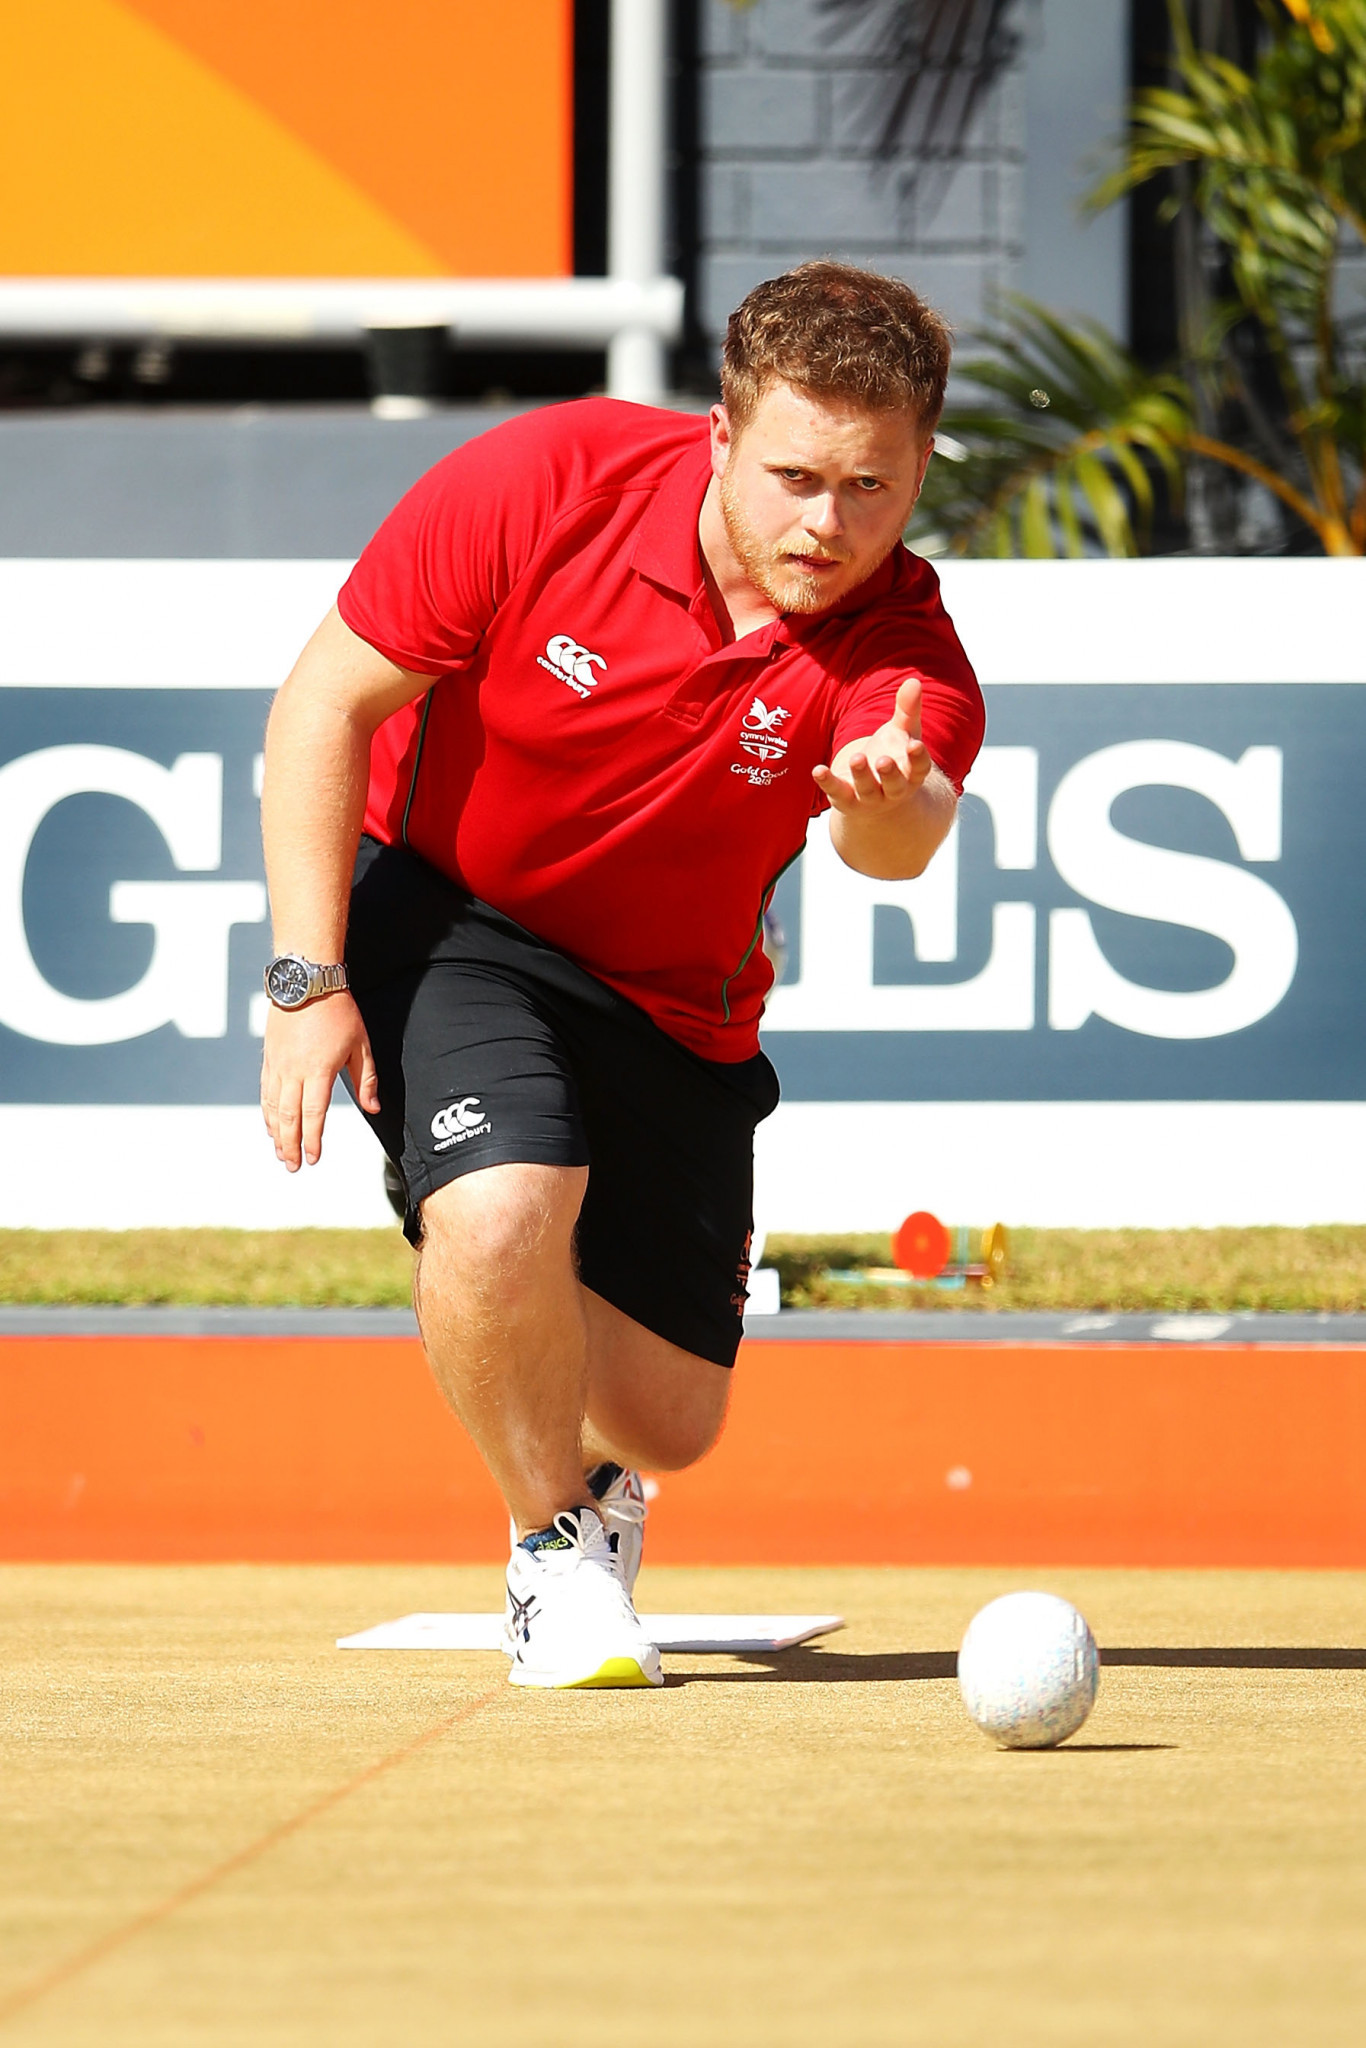 Home bowler Salmon knocks England’s Walker off top spot at World Bowls Atlantic Championships in Cardiff